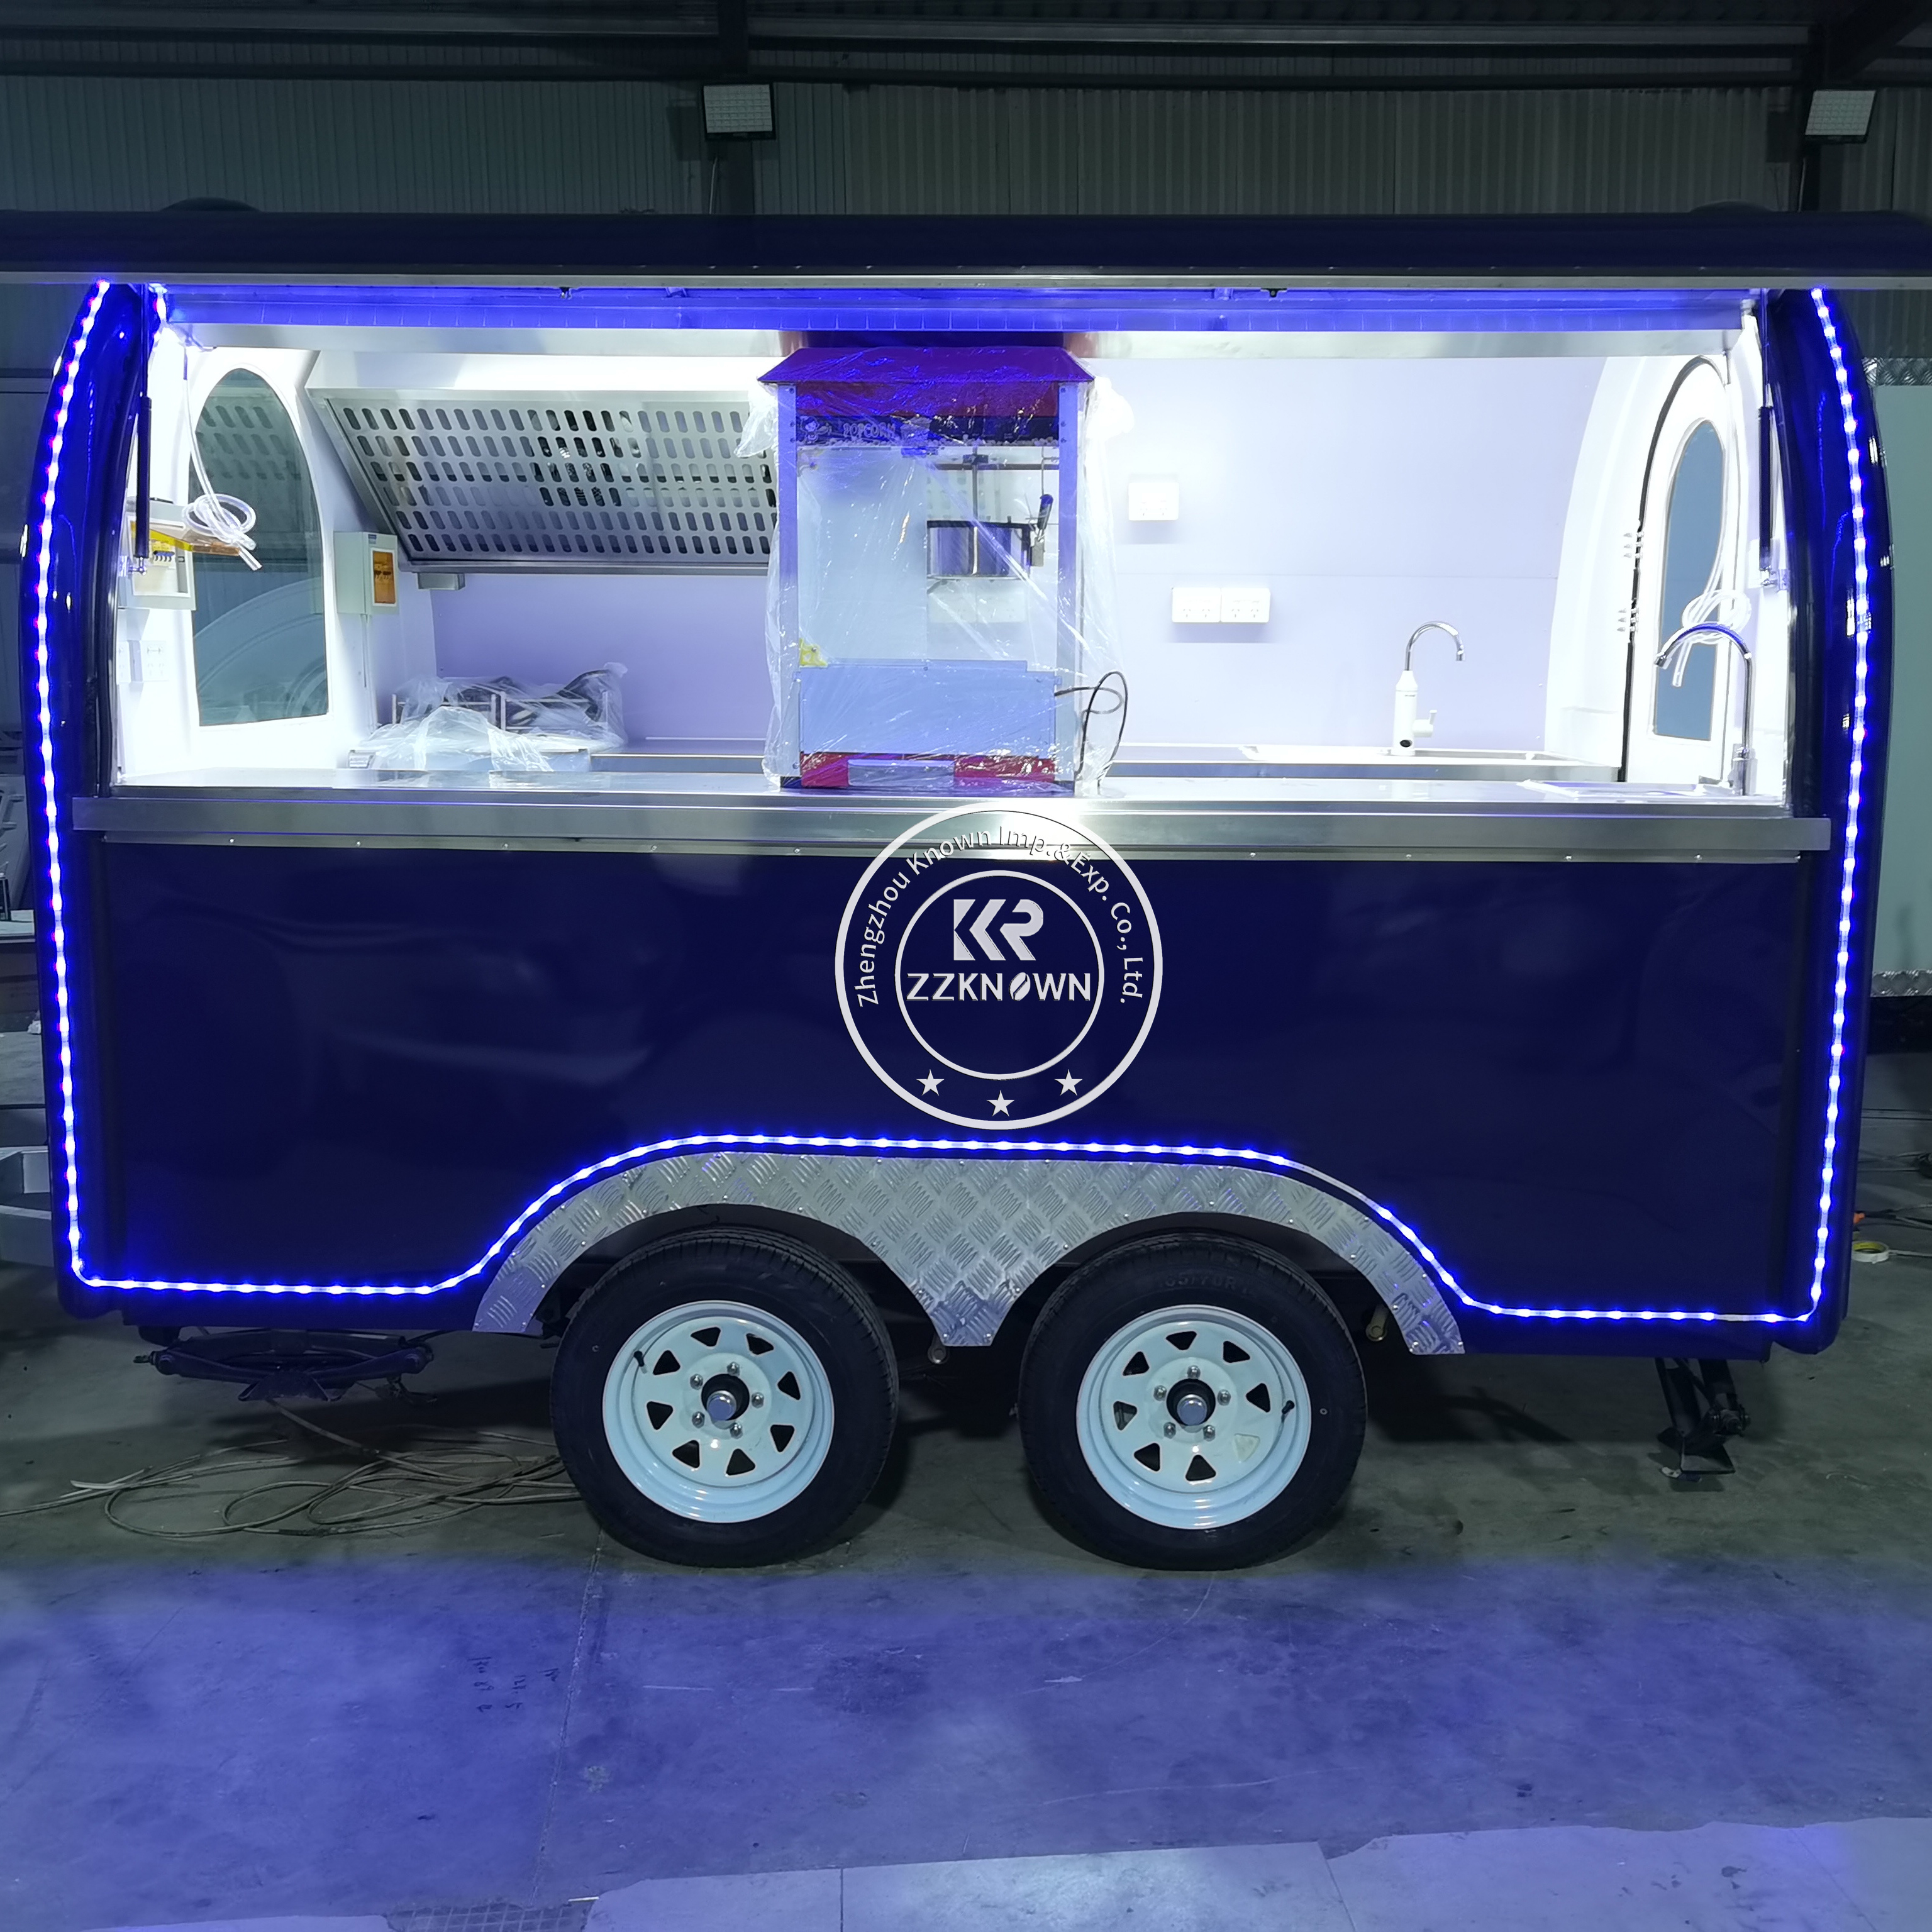 Mobile Kitchen Pizza Fast Food Trailer Alumina Airstream Mobile Coffee Ice Cream Food Truck Trailer With Full Kitchen For Sale